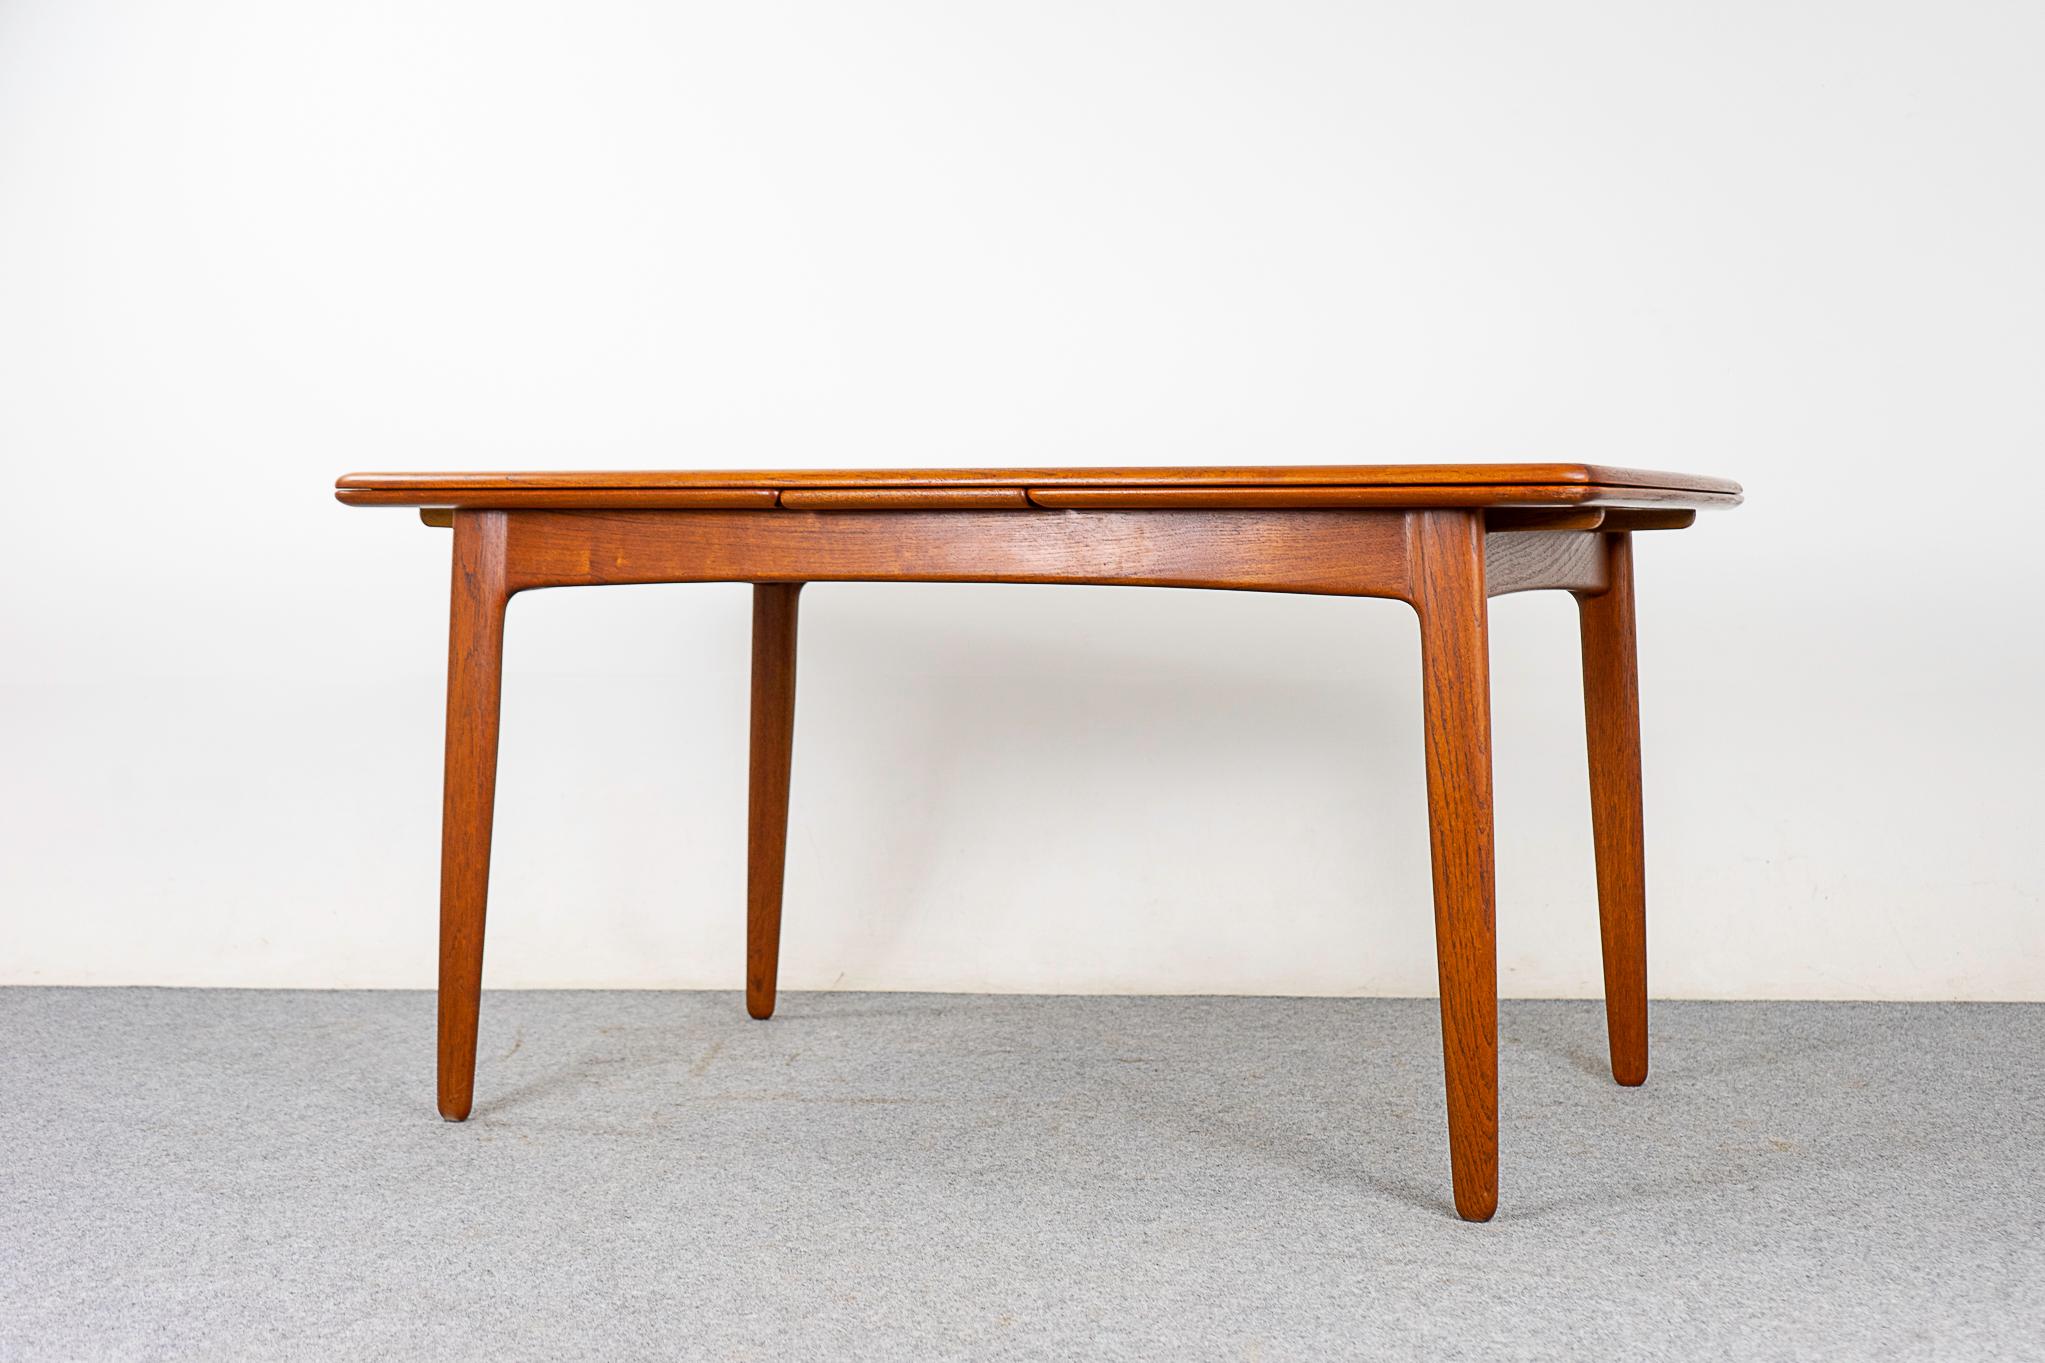 Danish Mid-Century Modern Teakdraw Leaf Dining Table by Svend Madsen For Sale 5